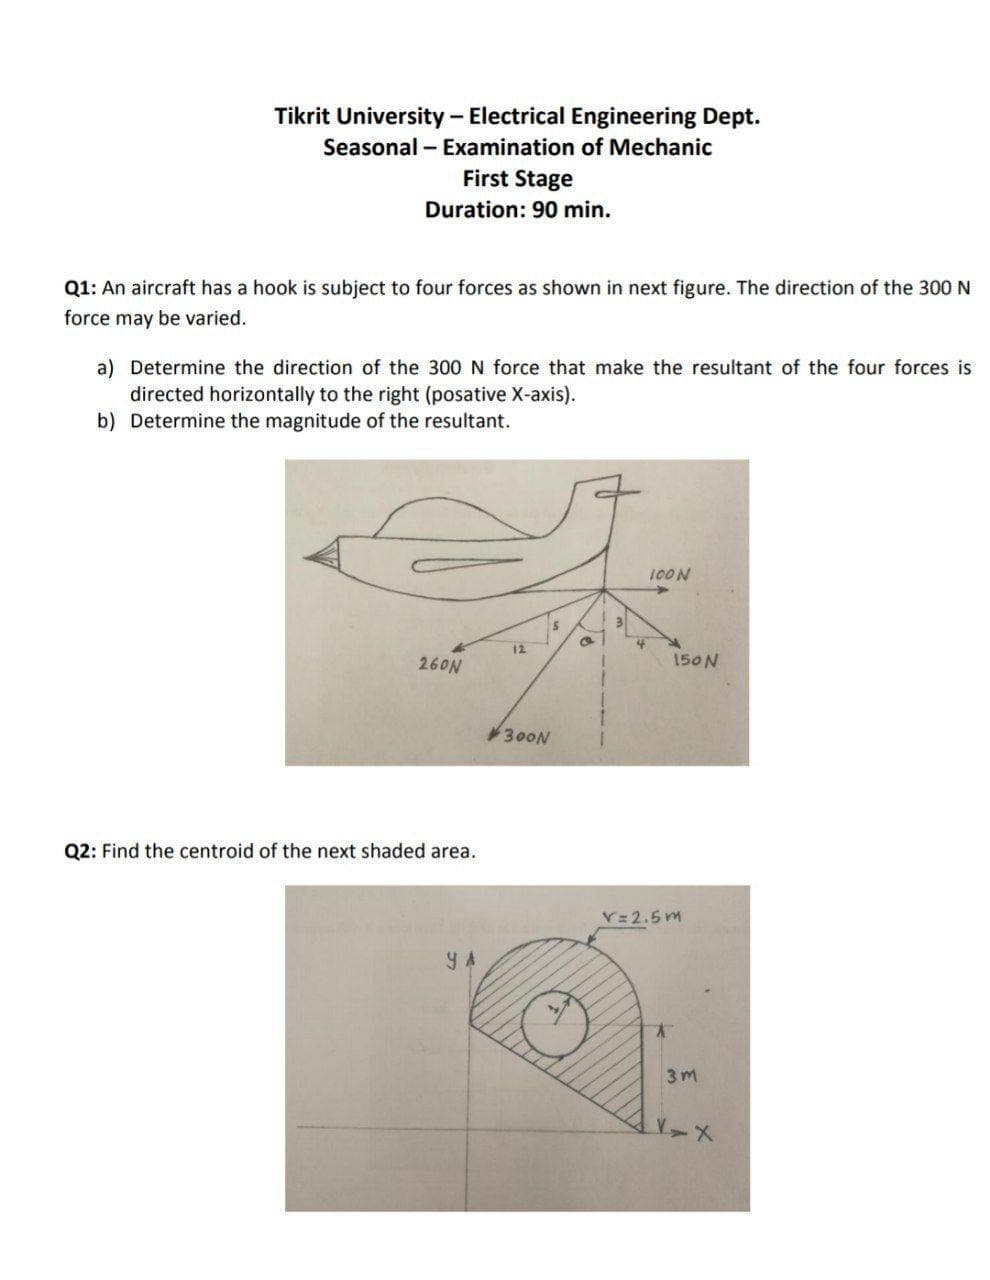 Tikrit University - Electrical Engineering Dept.
Seasonal - Examination of Mechanic
First Stage
Duration: 90 min.
Q1: An aircraft has a hook is subject to four forces as shown in next figure. The direction of the 300 N
force may be varied.
a) Determine the direction of the 300 N force that make the resultant of the four forces is
directed horizontally to the right (posative X-axis).
b) Determine the magnitude of the resultant.
100N
31
12
260N
150N
300N
Q2: Find the centroid of the next shaded area.
V= 2.5 m
Y A
3m
